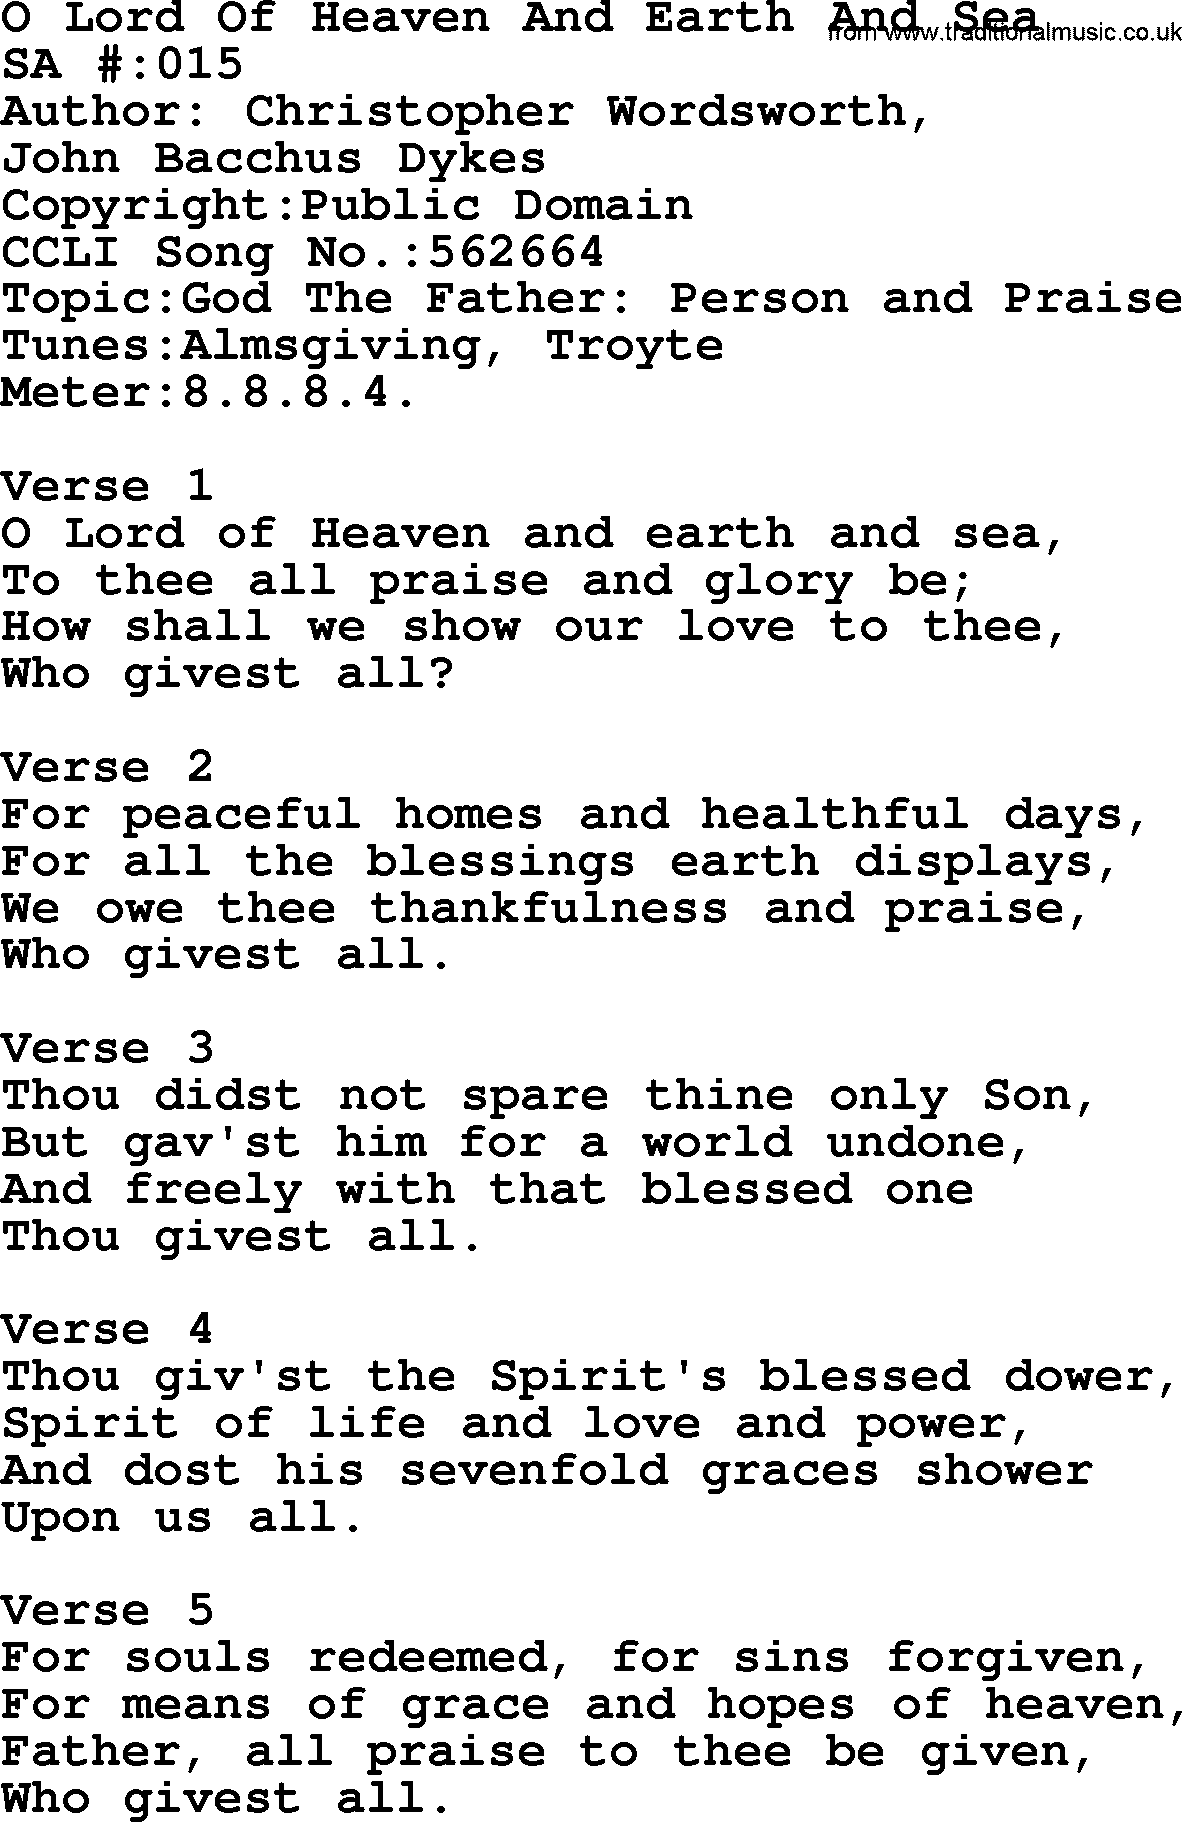 Salvation Army Hymnal, title: O Lord Of Heaven And Earth And Sea, with lyrics and PDF,